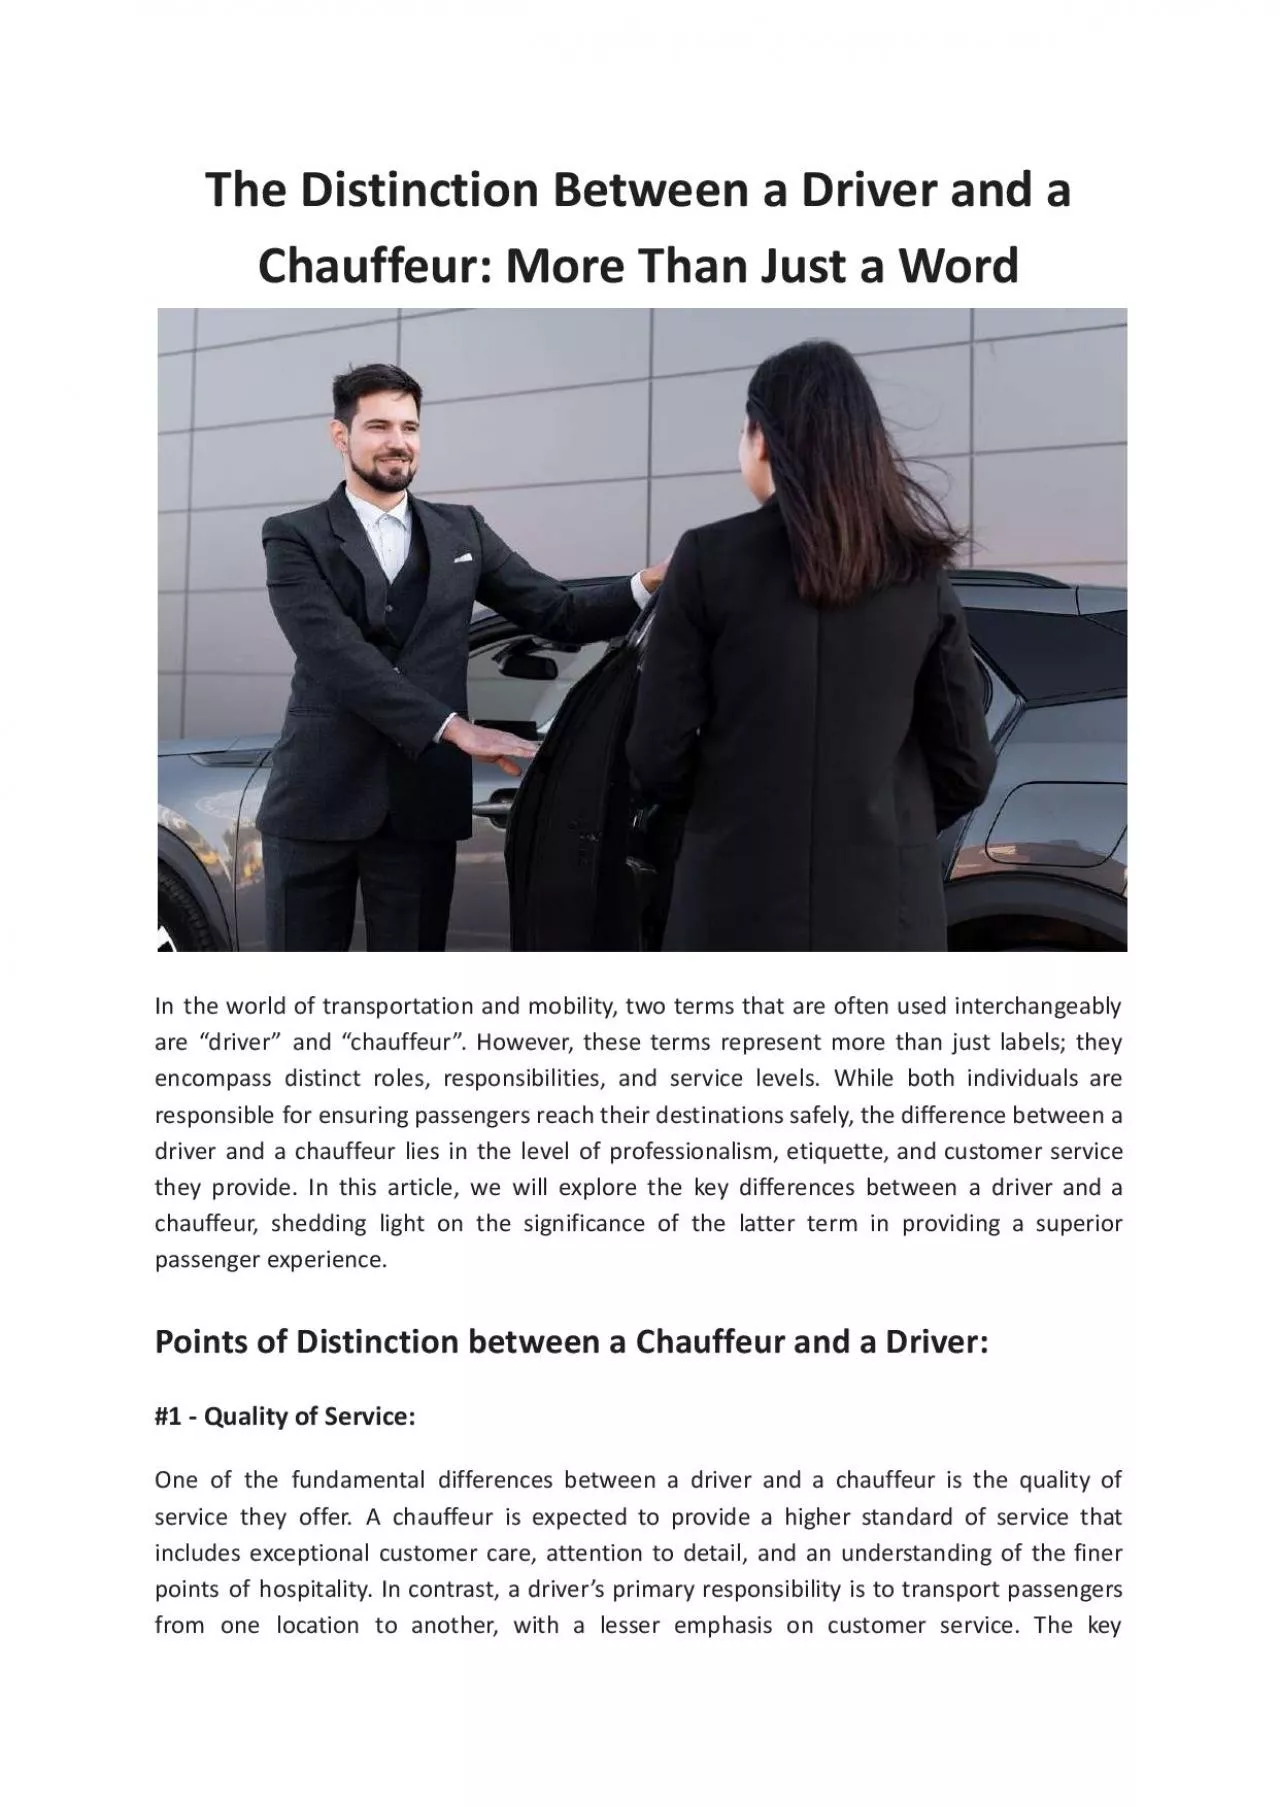 The Distinction Between a Driver and a Chauffeur: More Than Just a Word